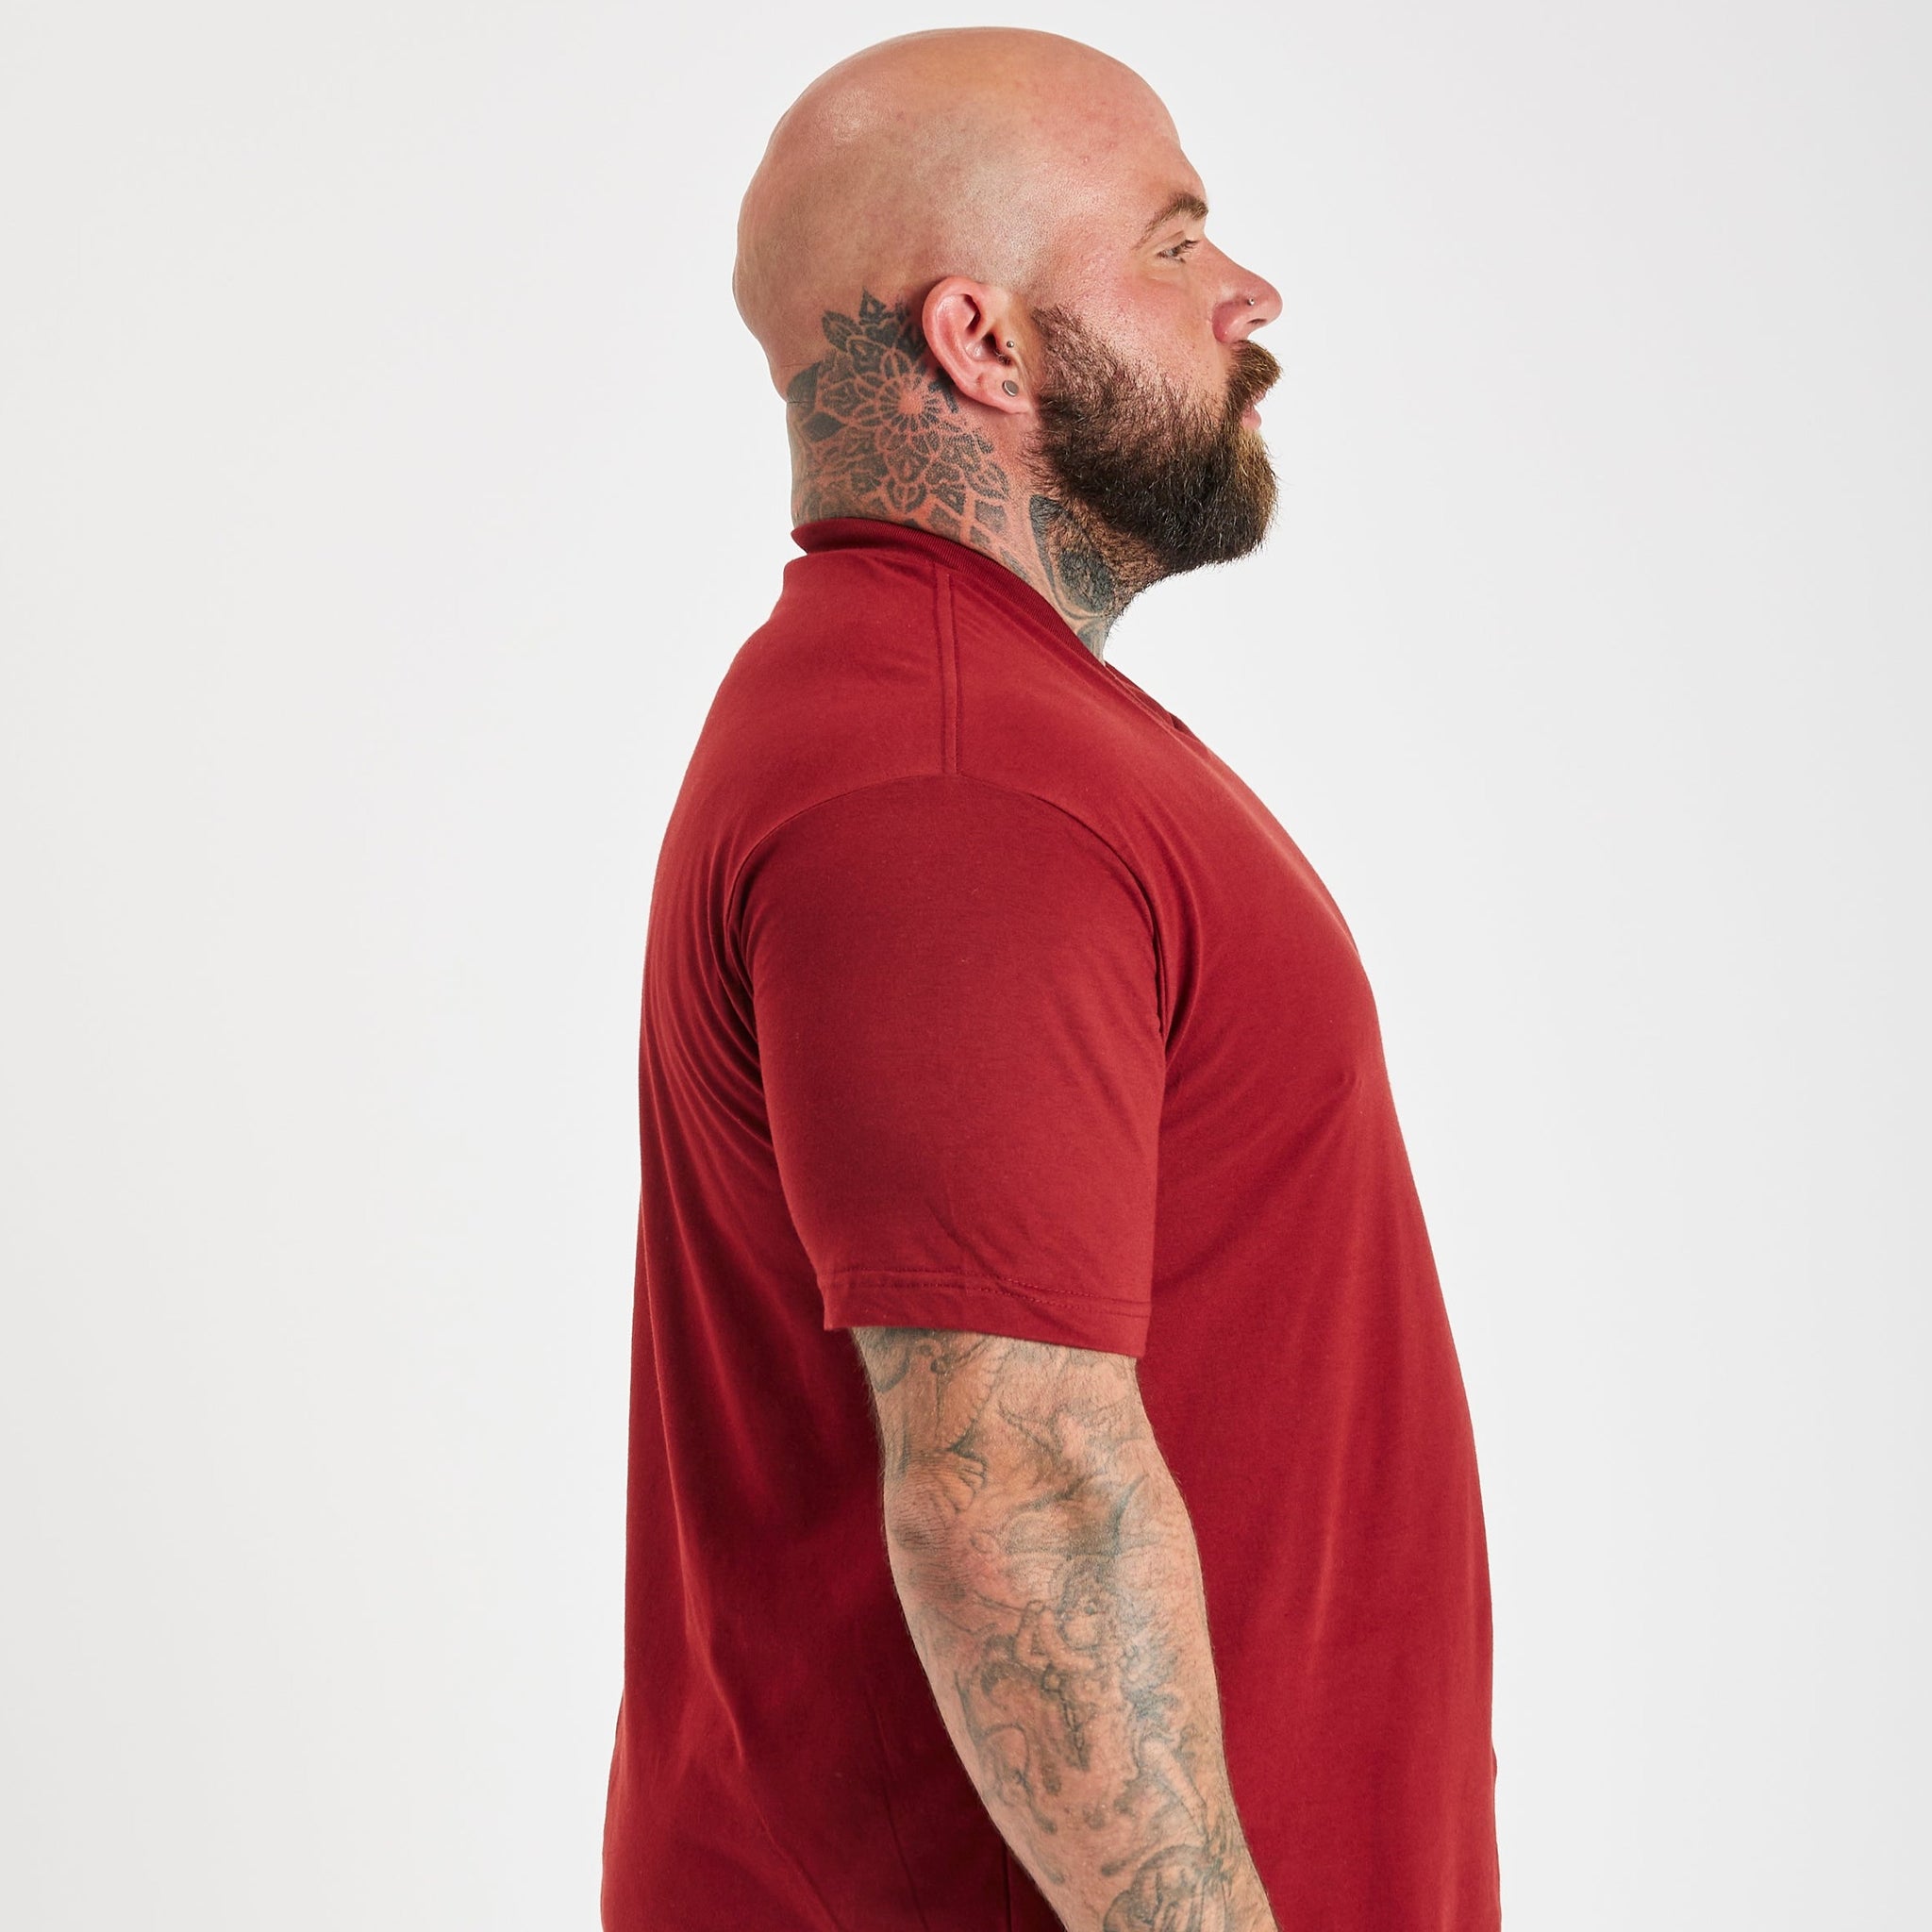 Load image into Gallery viewer, Burgundy V-Neck T-Shirt
